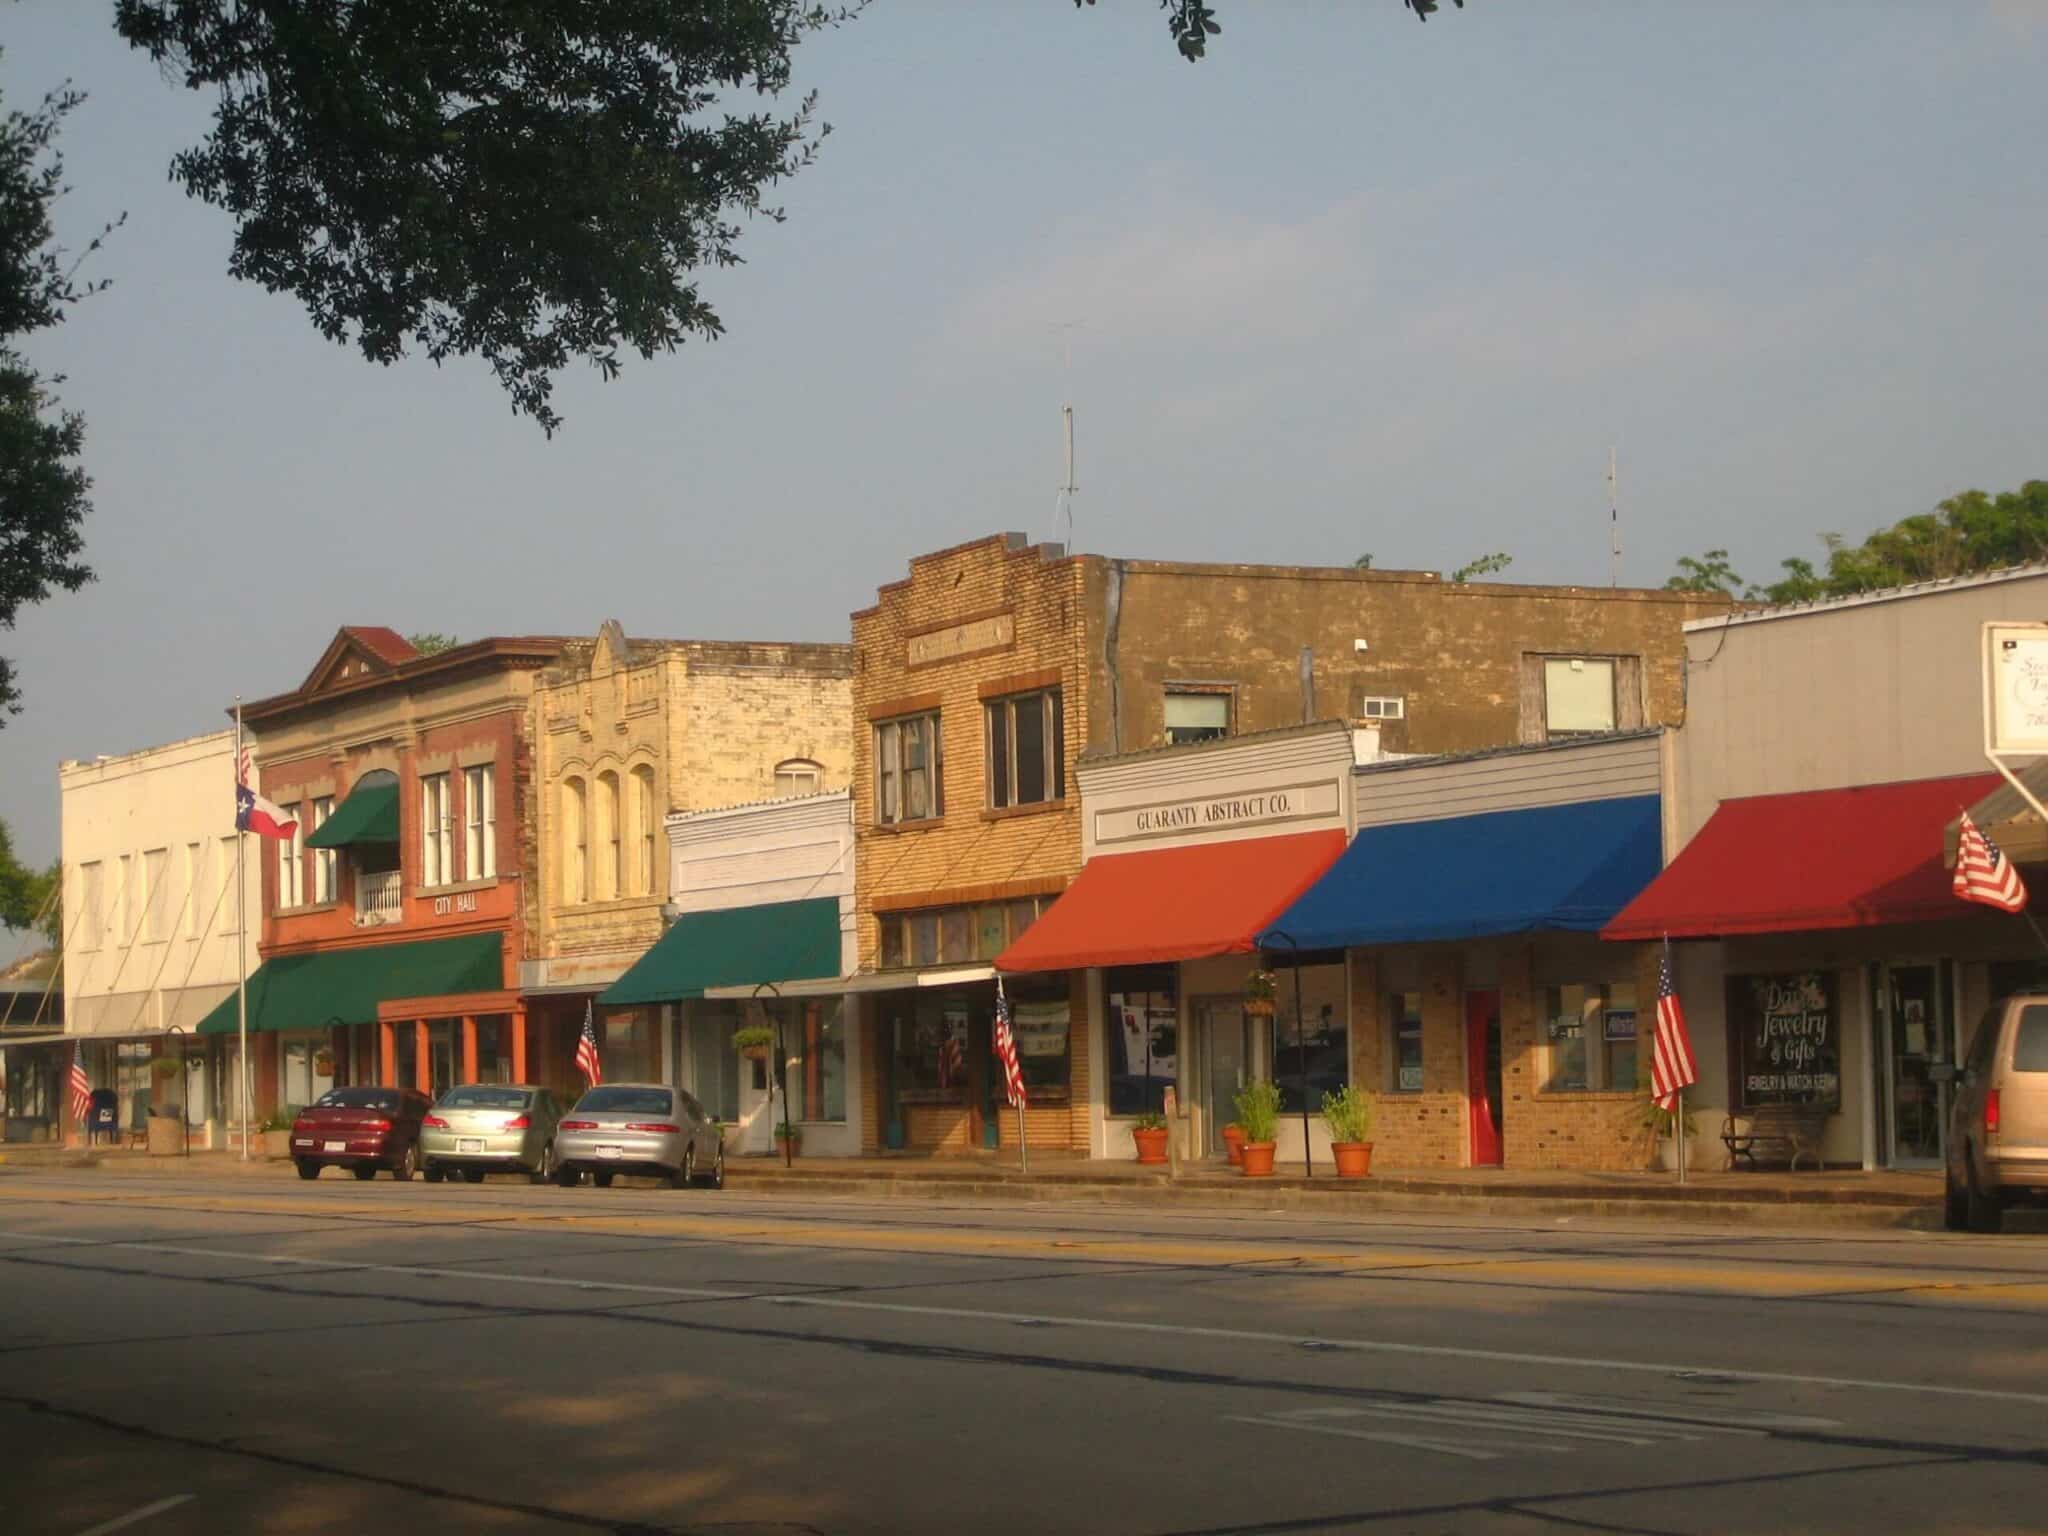 The shops in downtown Edna, Texas.